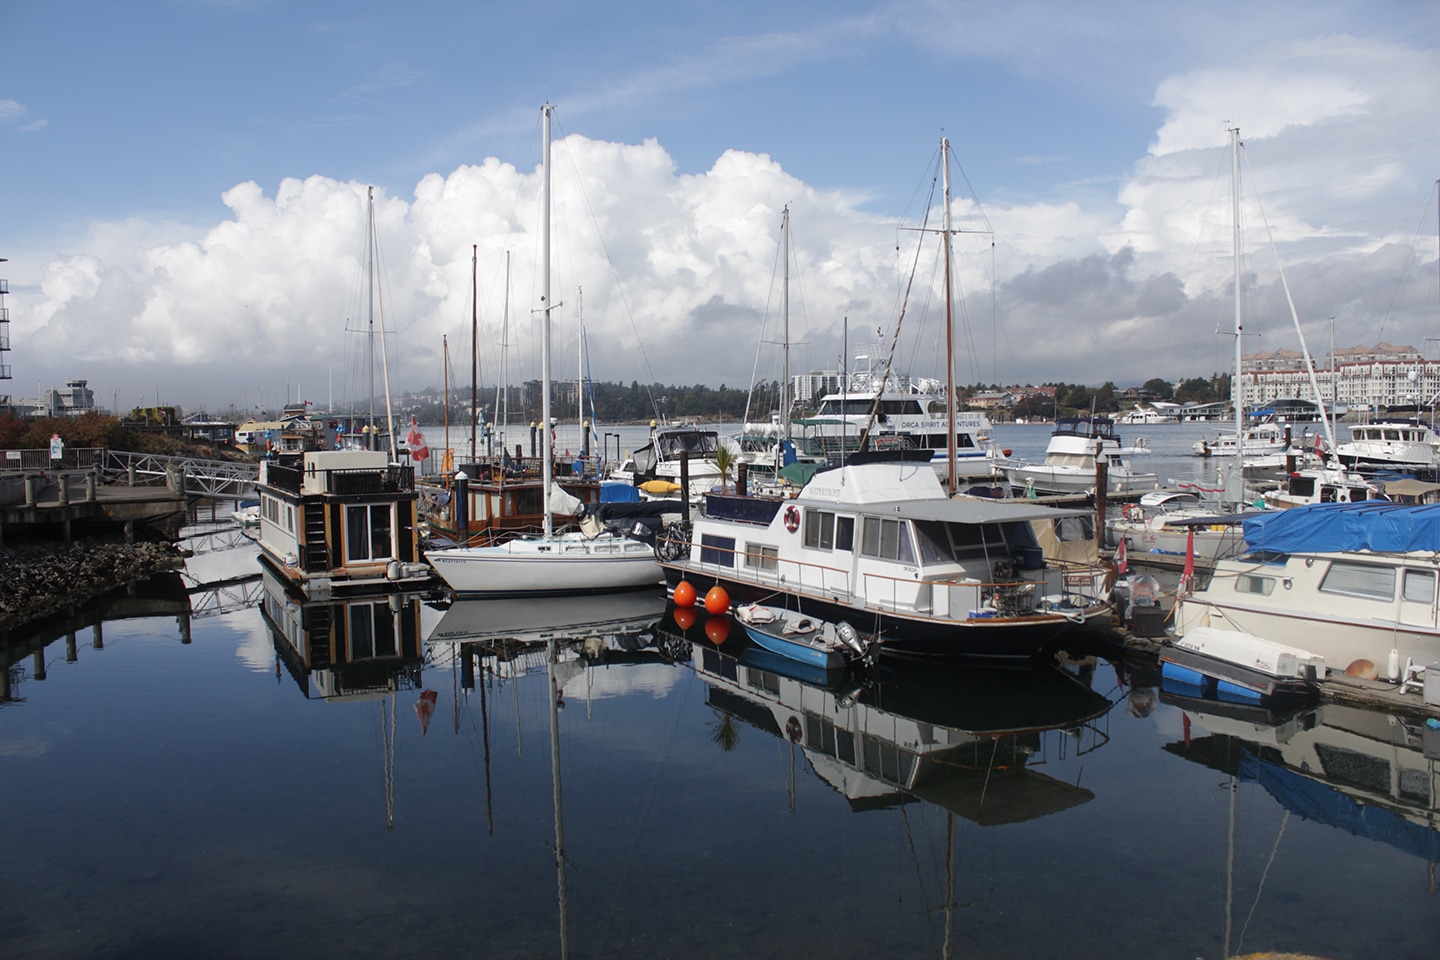 Numerous boats of all shapes and sizes sit in a still marina outside Victoria, British Columbia